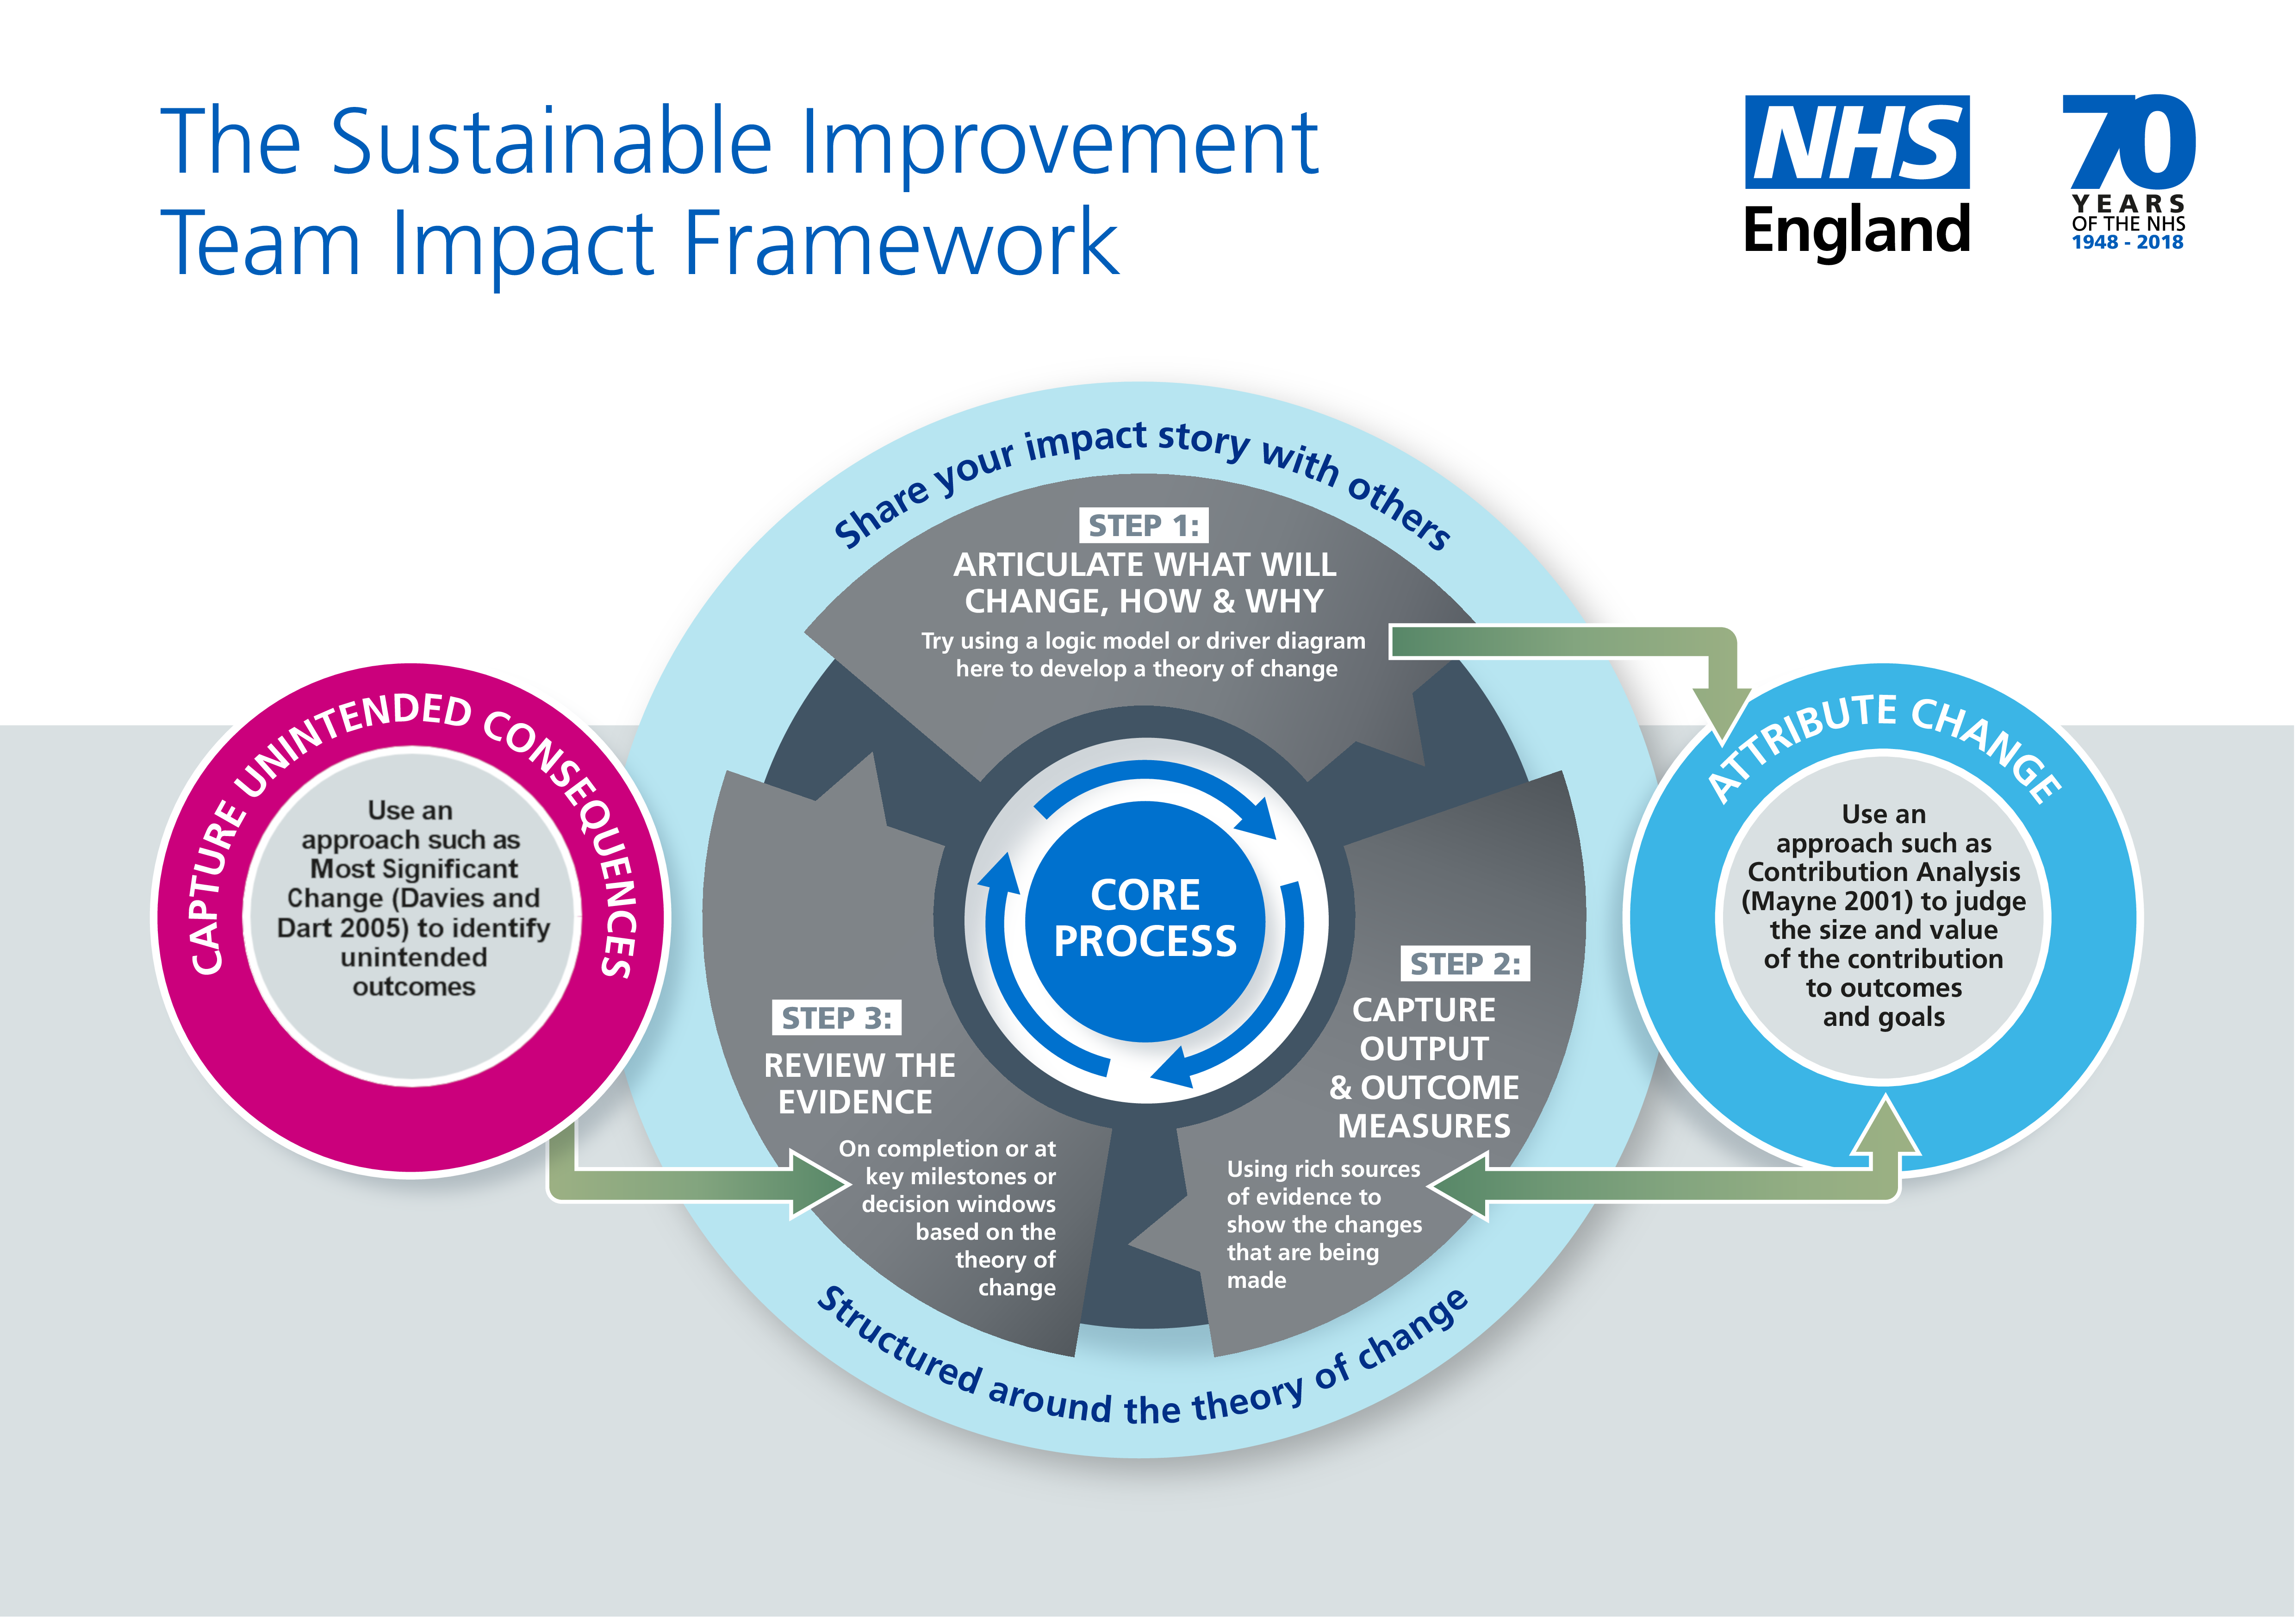 The Impact Framework is an evolving approach, being continuously refined and improved based on our experiences in implementing it with colleagues in NHS England’s Sustainable Improvement team and we would welcome any feedback.